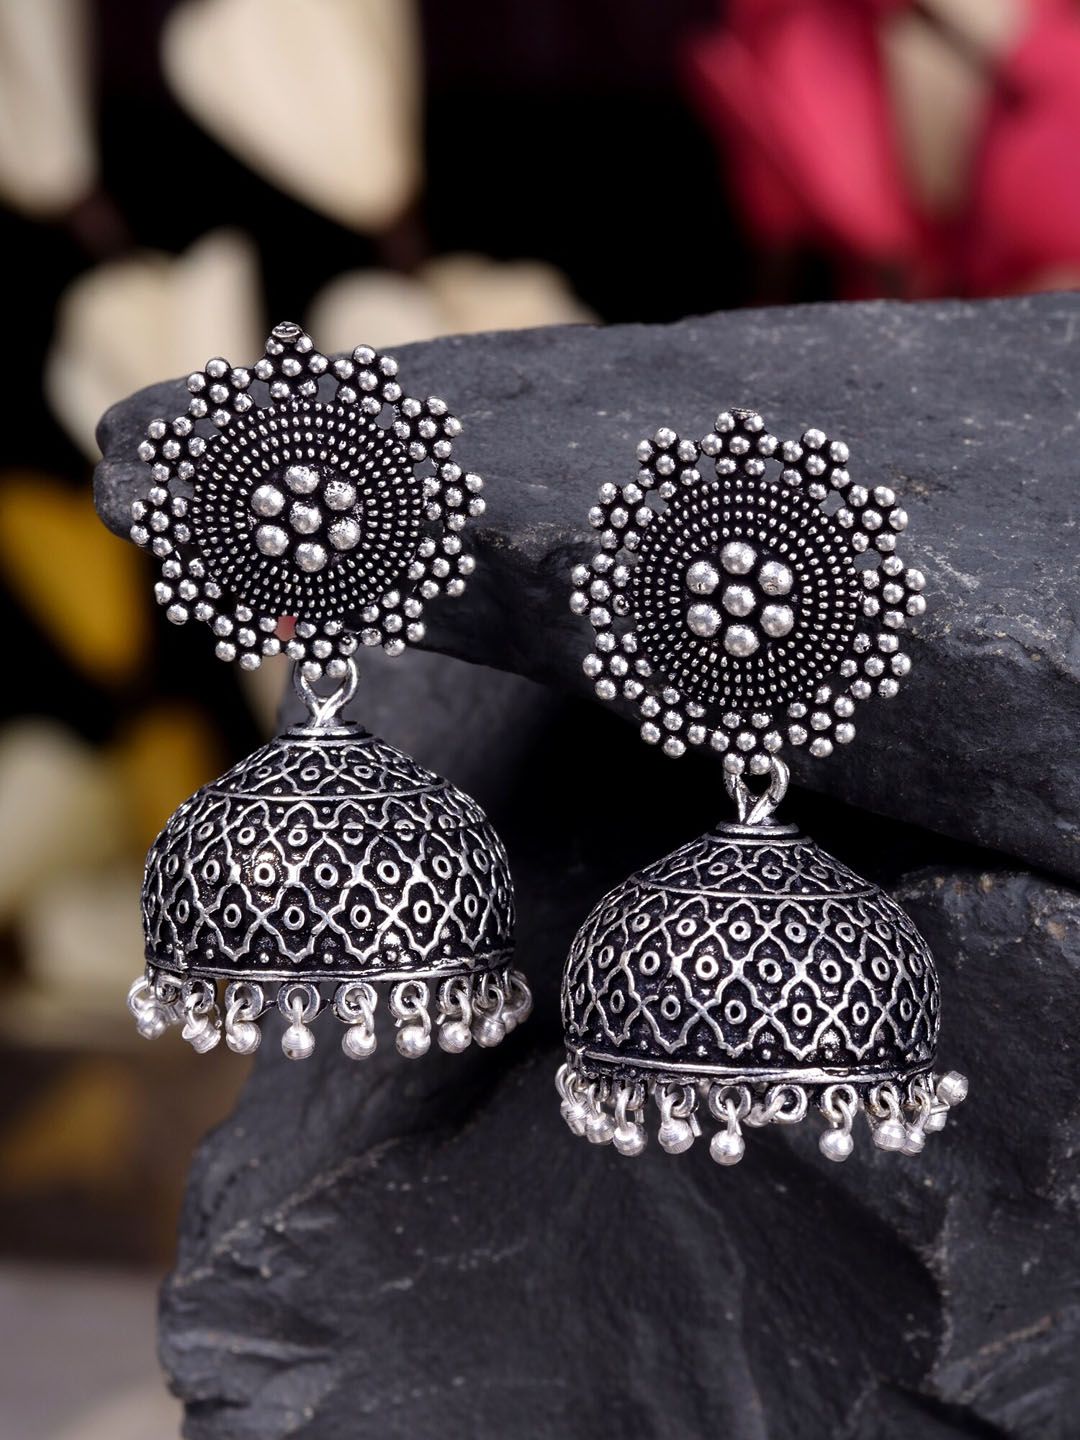 Saraf RS Jewellery Silver-Toned Dome Shaped Jhumkas Earrings Price in India